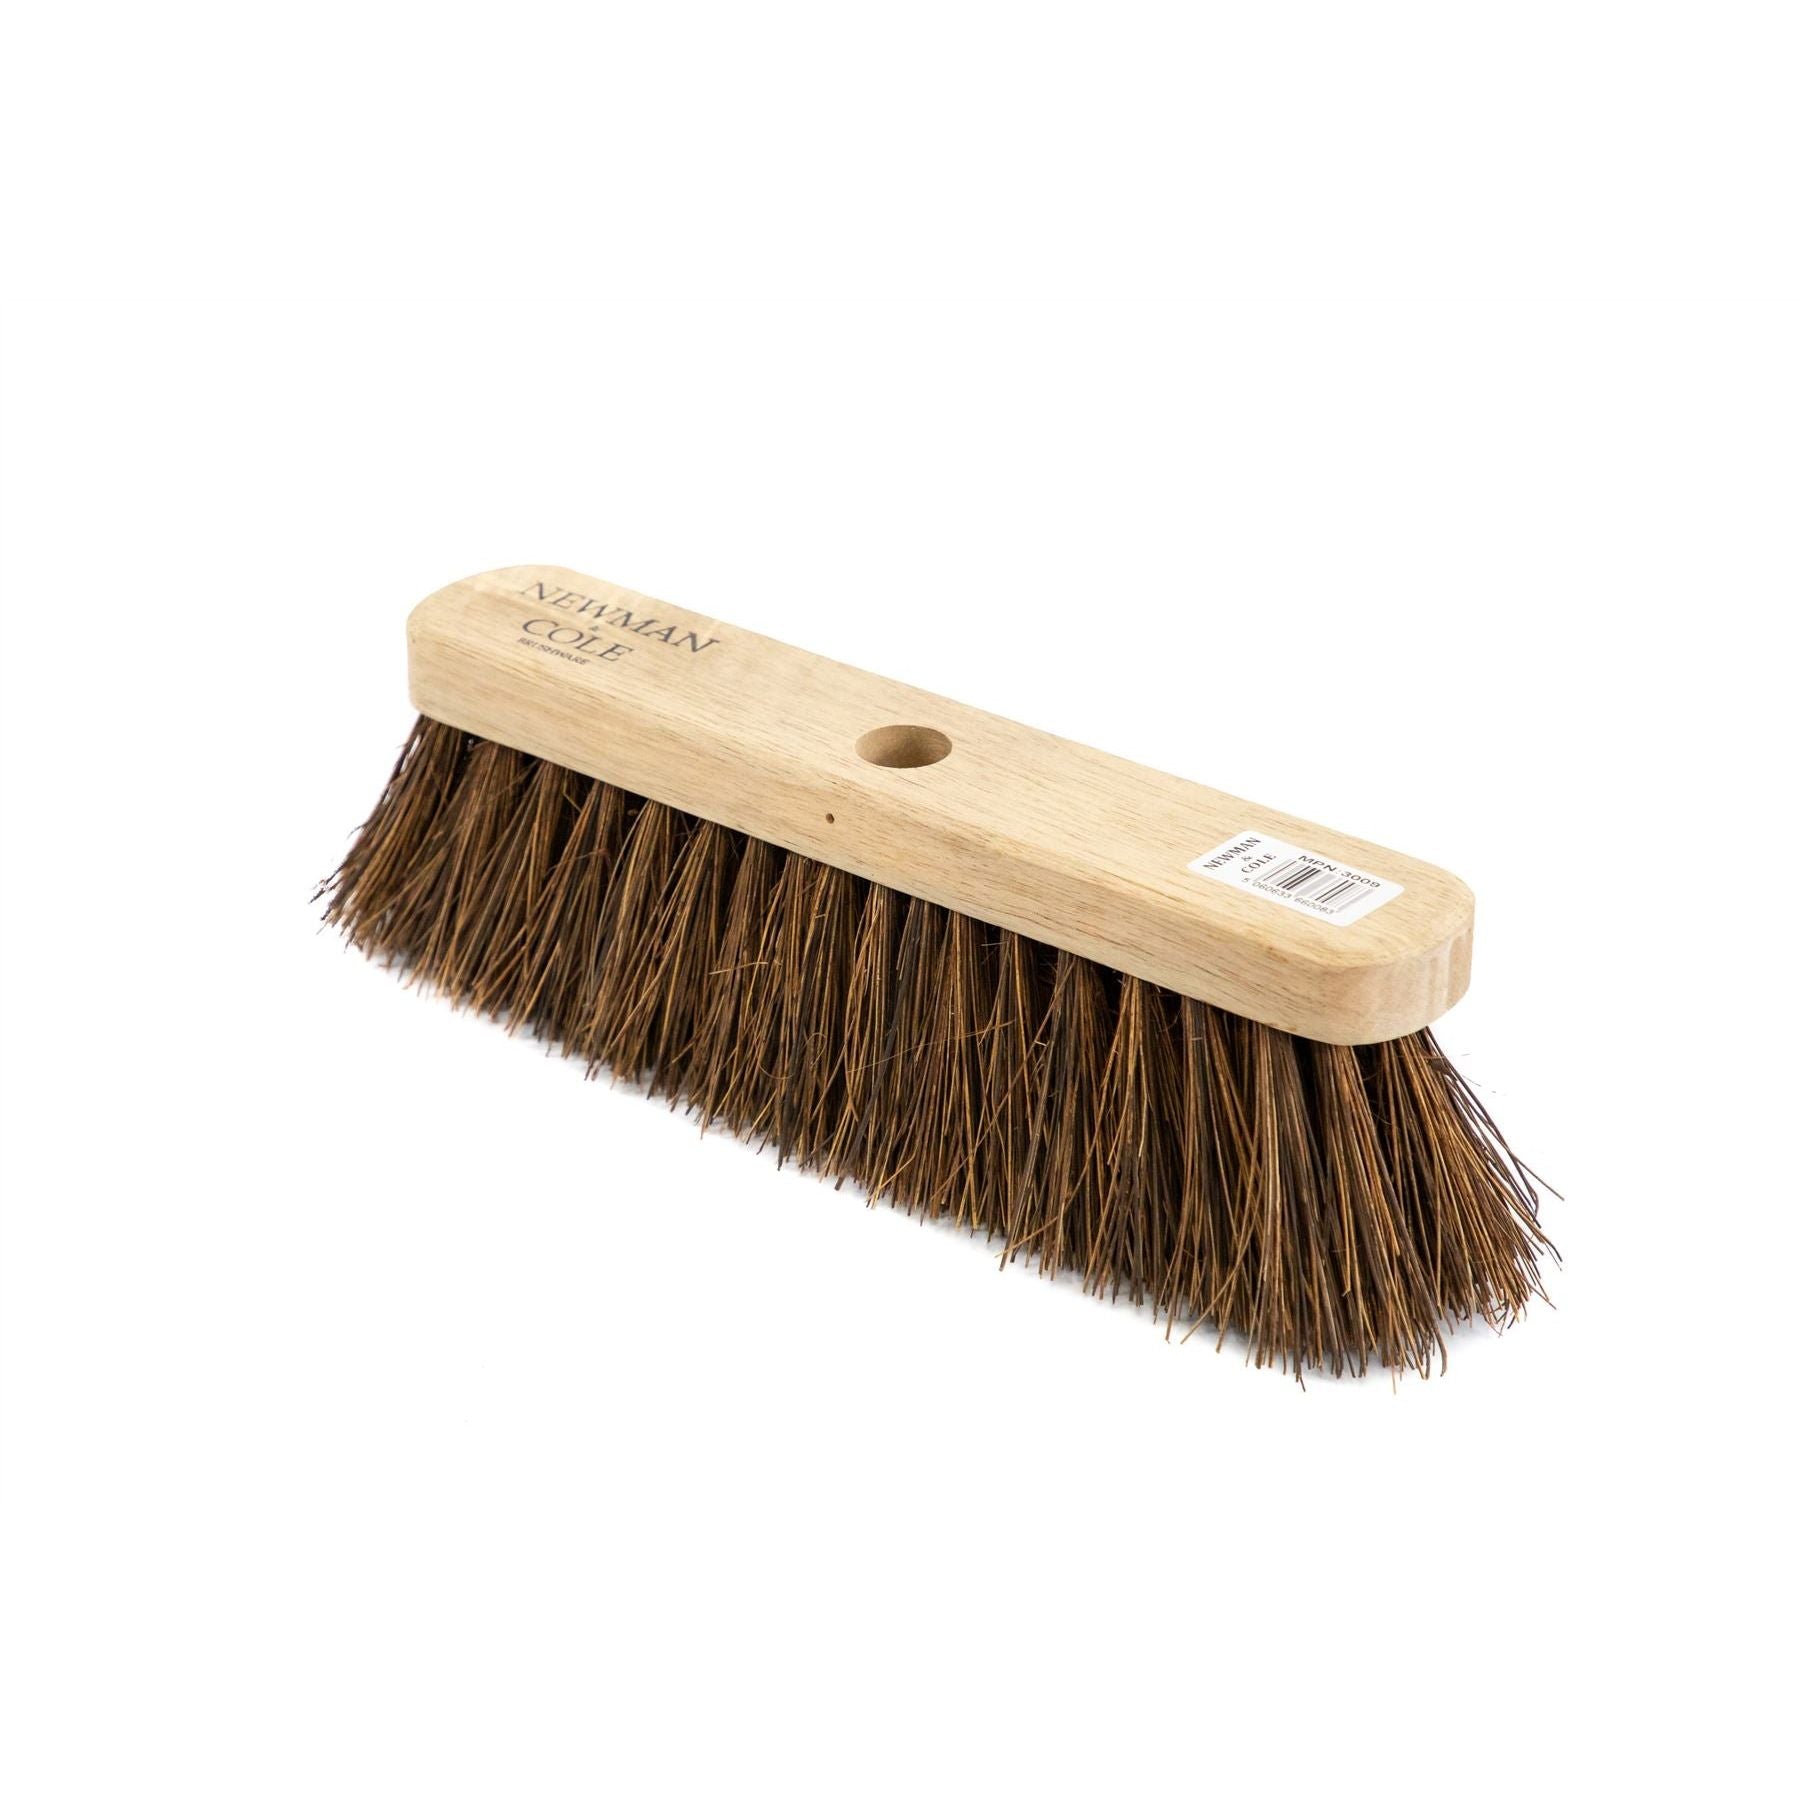 Newman and Cole 12" Natural Bassine Broom Head with Hole